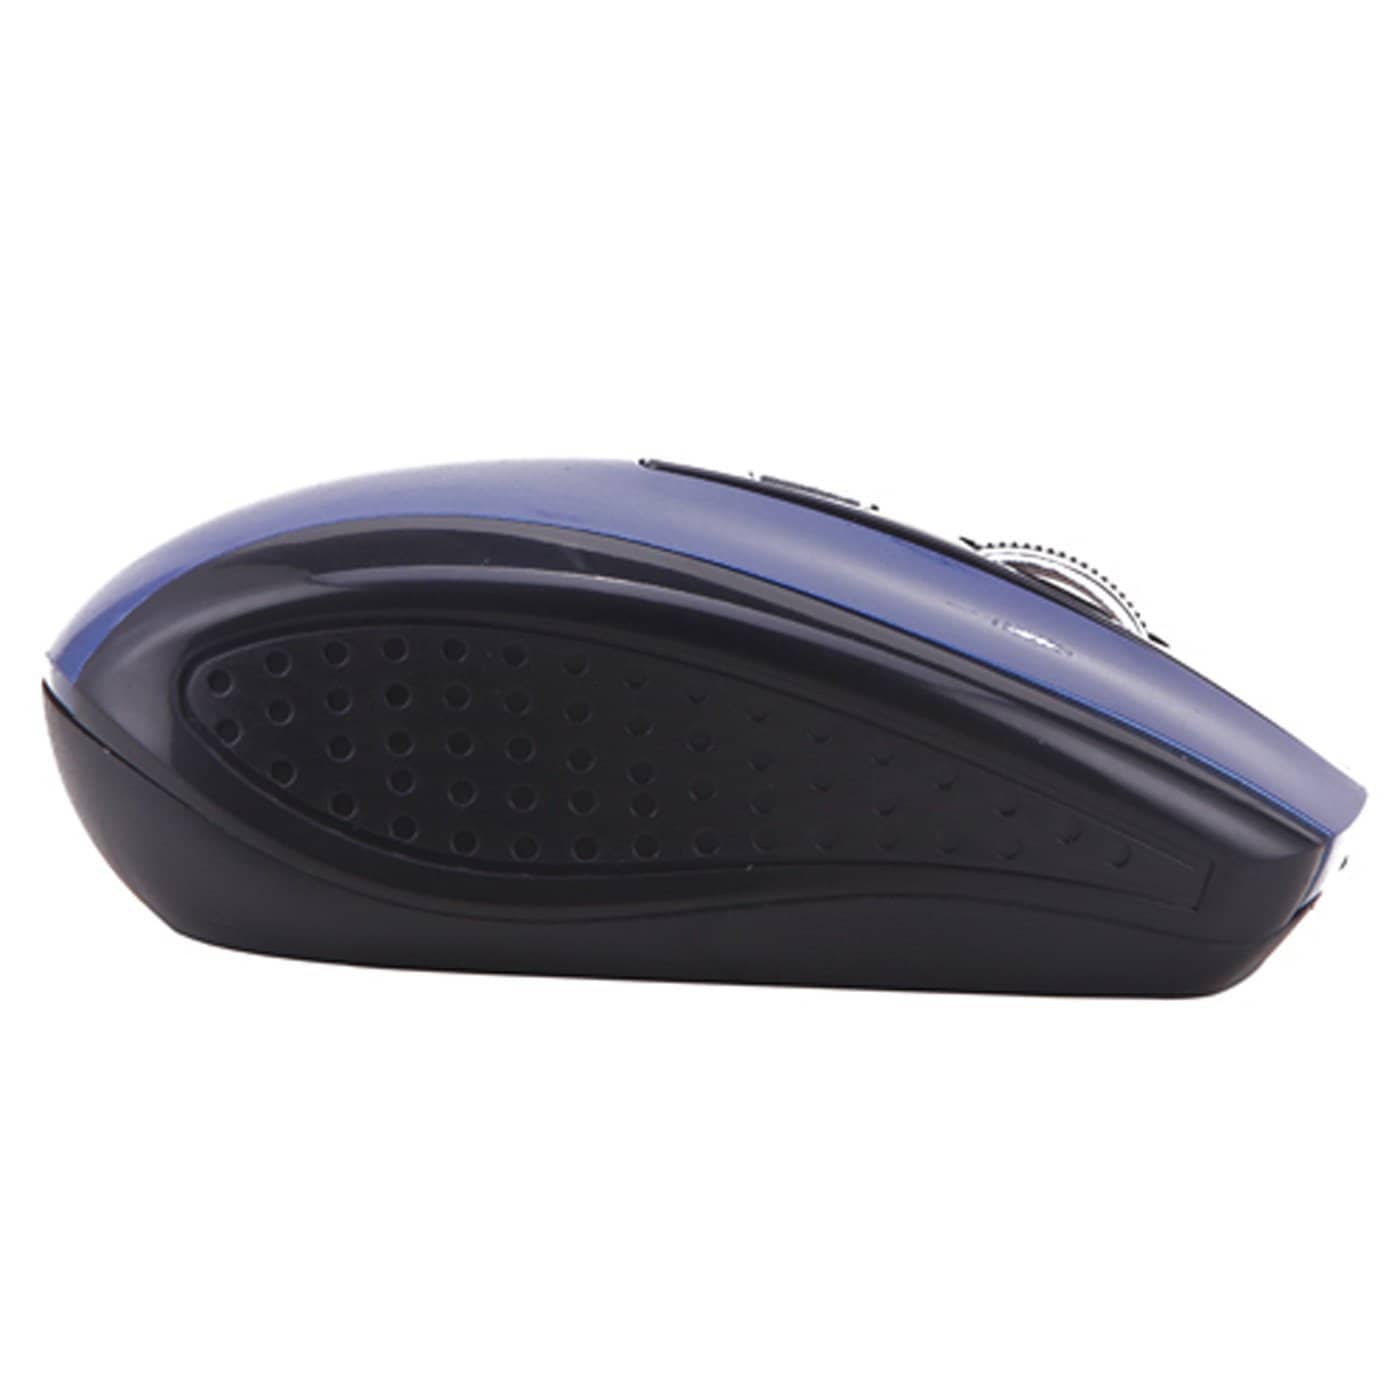 HDE Wireless Optical Computer Mouse 2.4 GHz - Blue